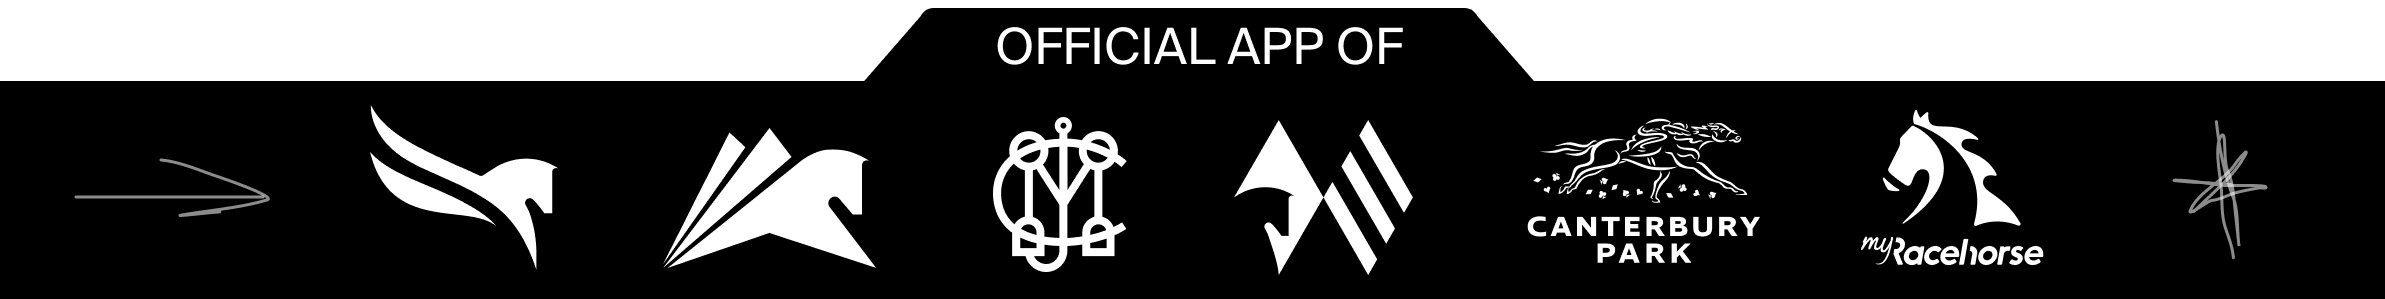 Official App of